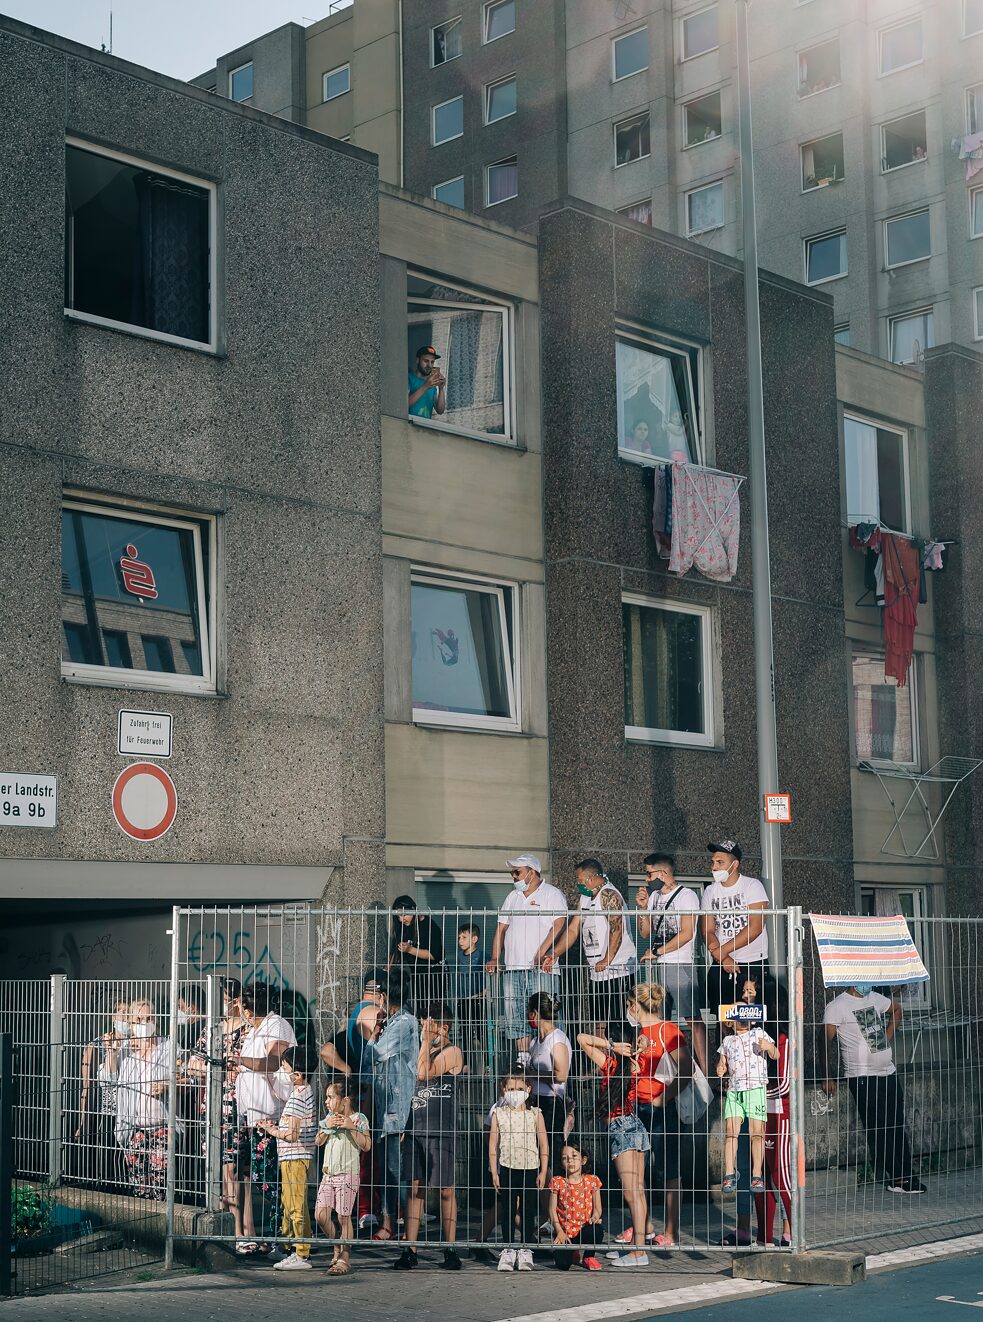 In mid-June, 120 of 700 residents of a prefabricated building in northern germany are infected with corona. The city bans all resi¬dents from leaving the housing complex, imposes a quarantine and puts up fences. Photo taken: 23.06.2020, Göttingen. 